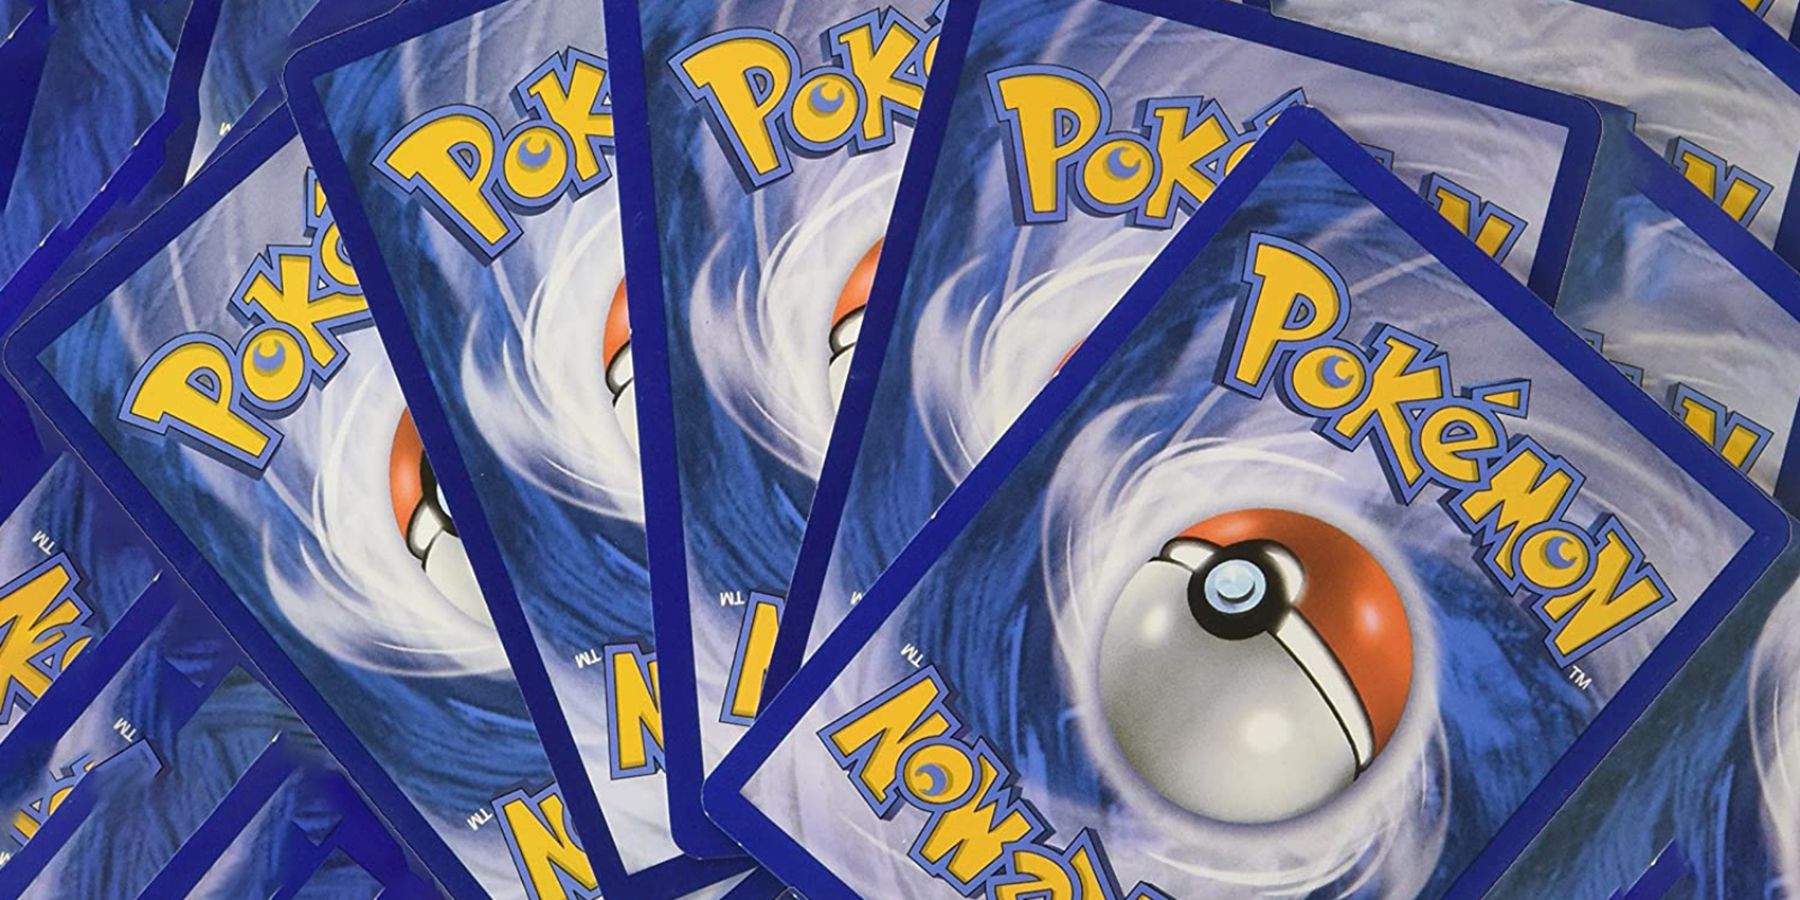 Man Used Fraudulently Obtained COVID Relief Funds to Buy Expensive Pokemon Card